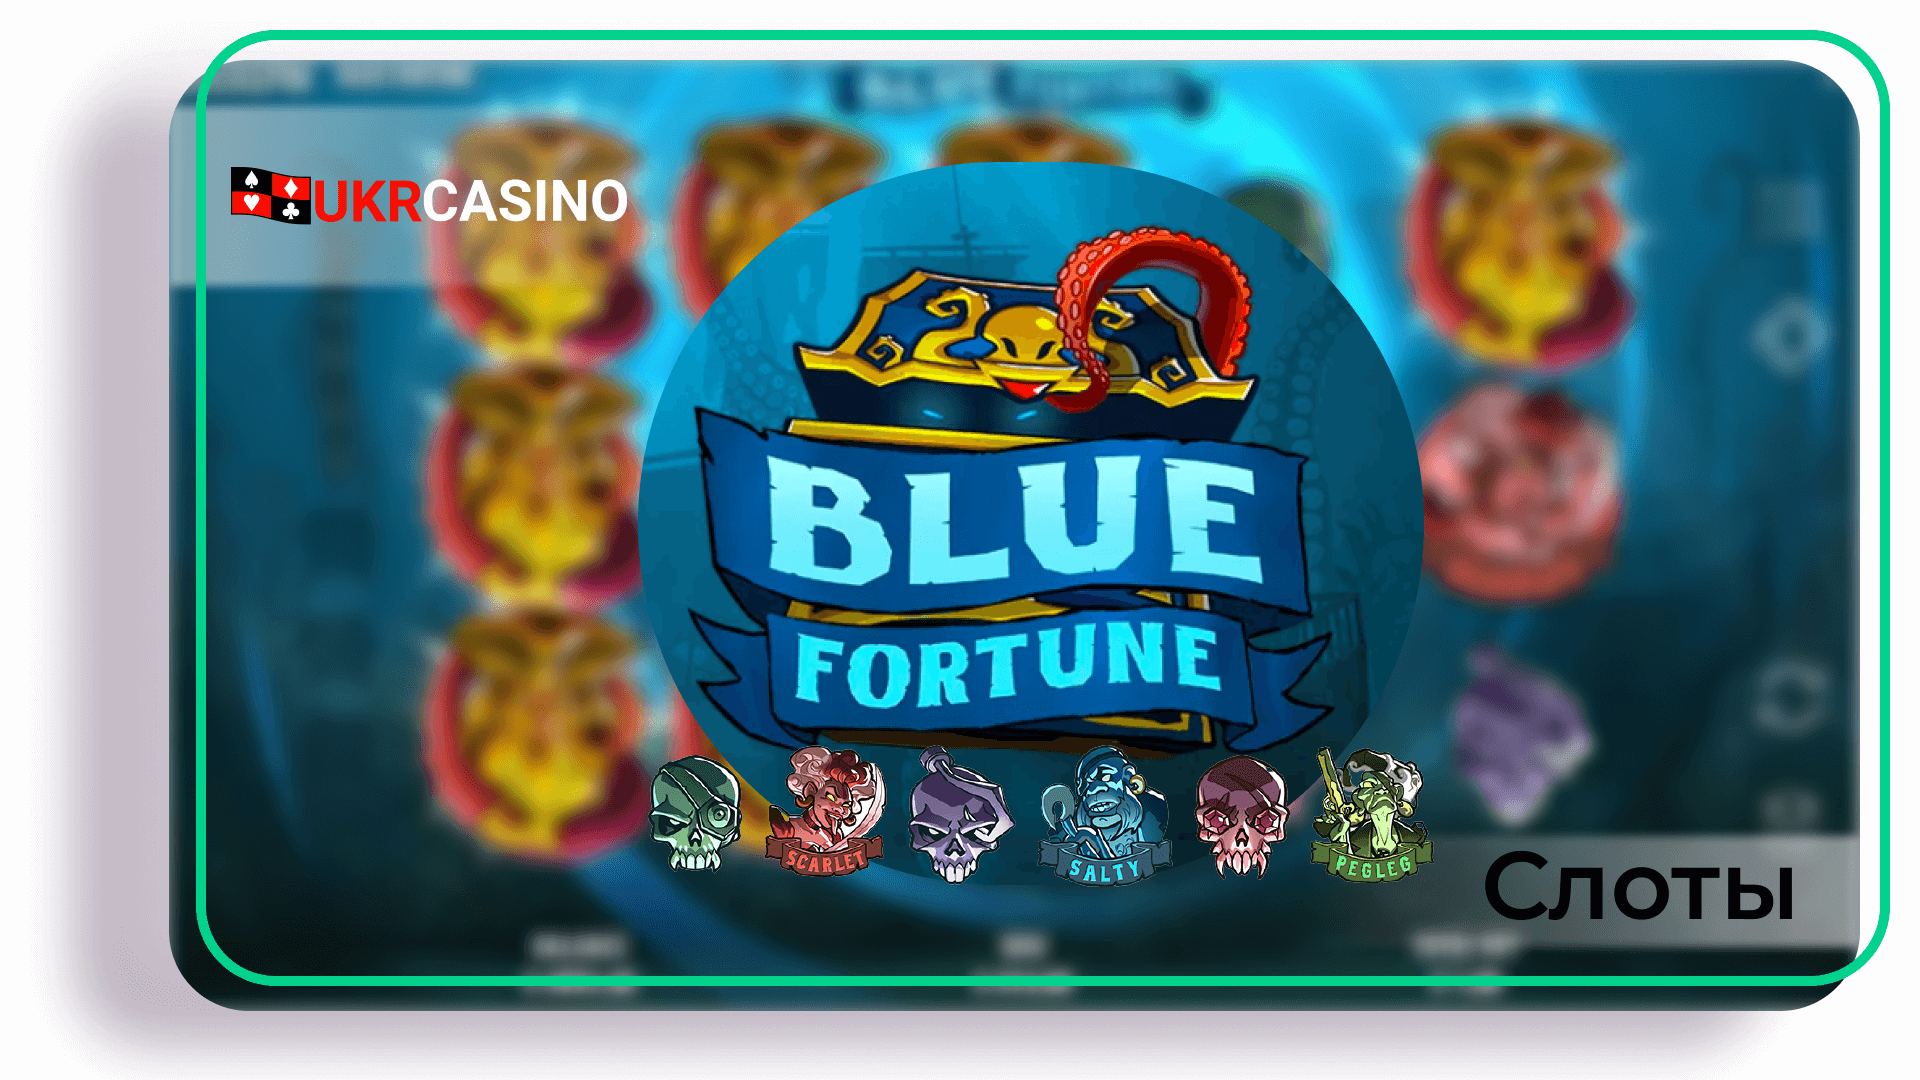 Blue Fortune - Quickspin